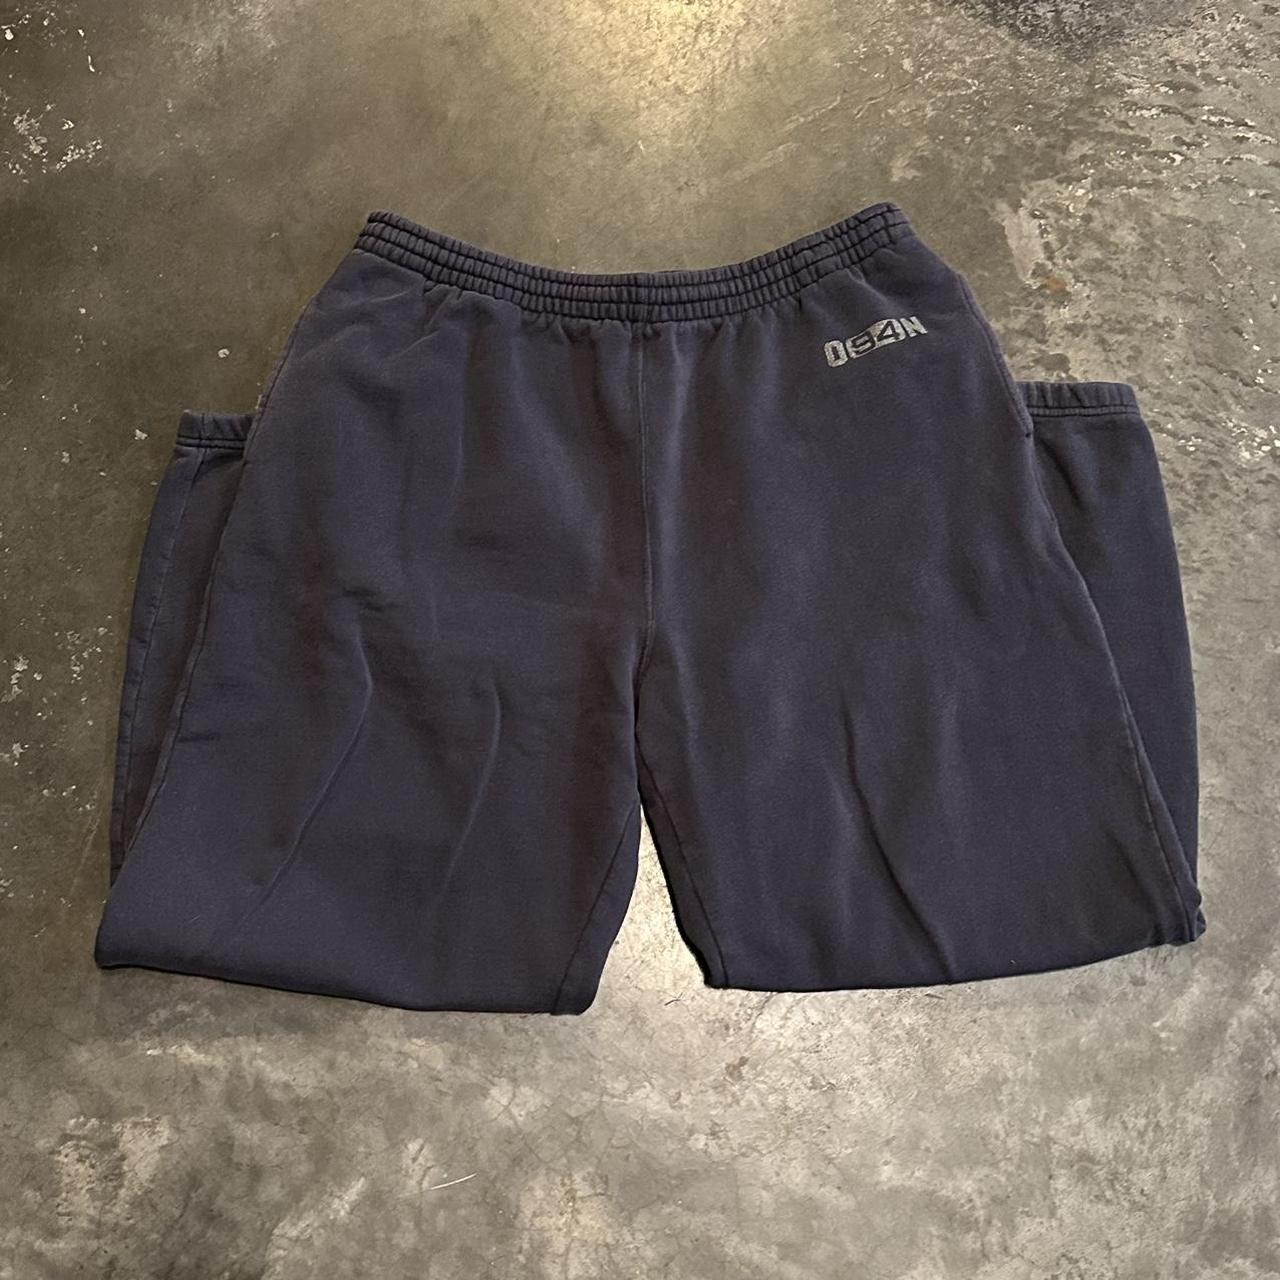 old navy blue sweatpants size LARGE small stain on - Depop